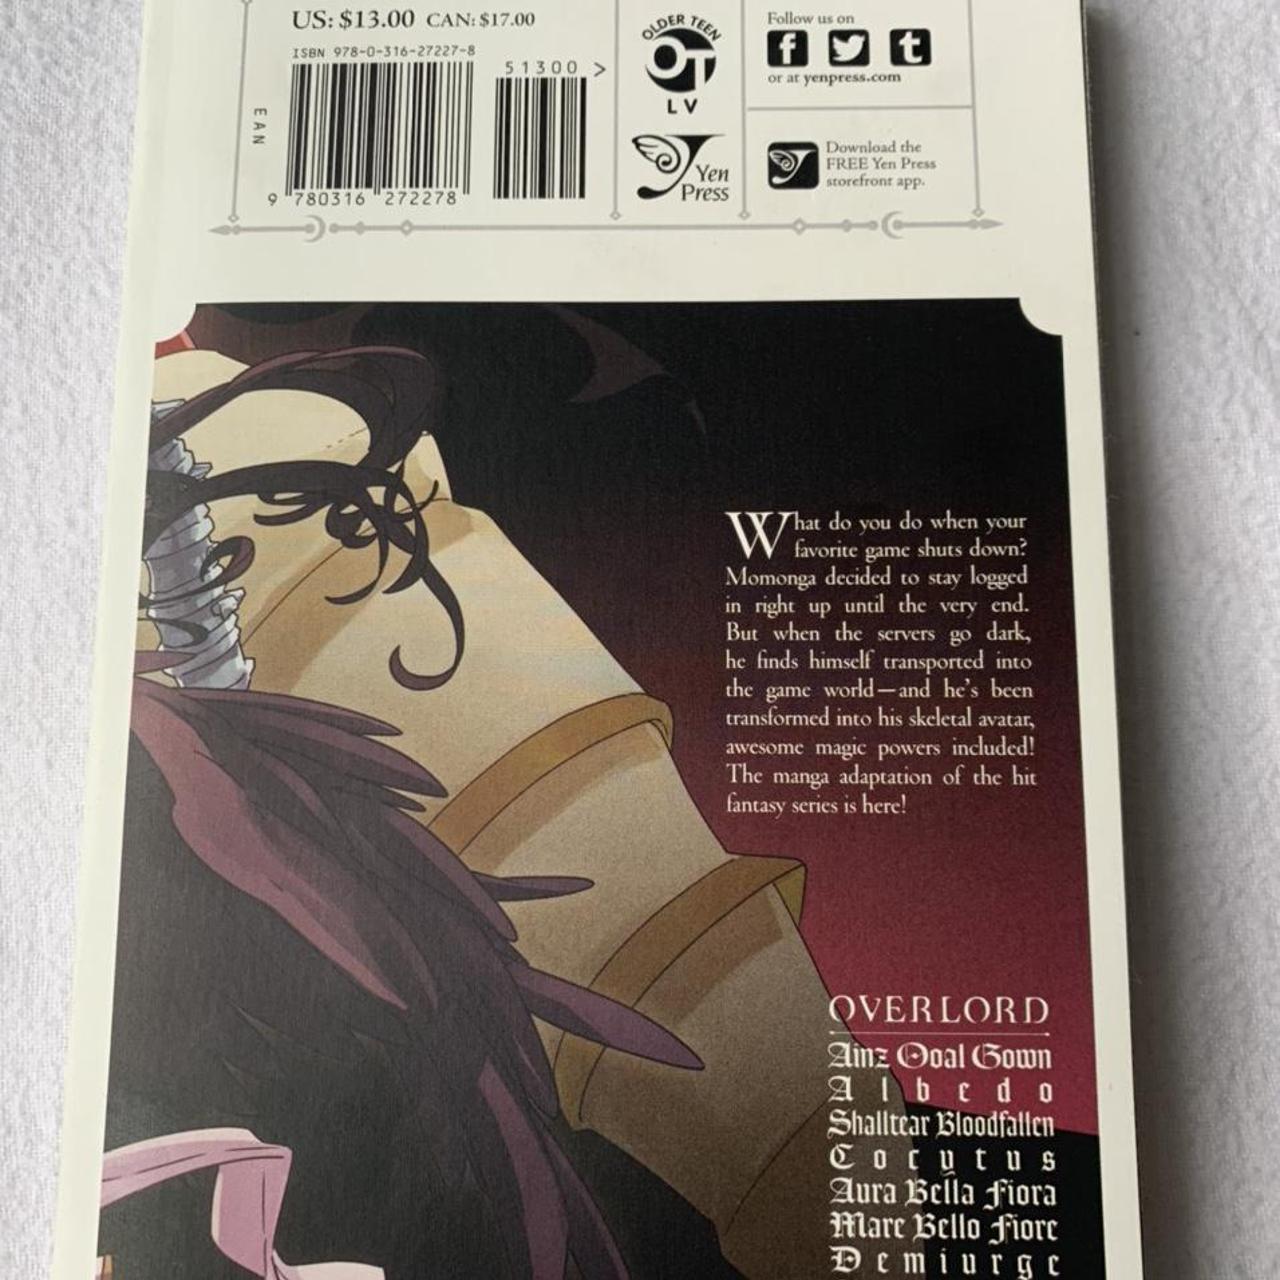 Product Image 2 - Overlord Manga Vol 1 [ENG]

Great